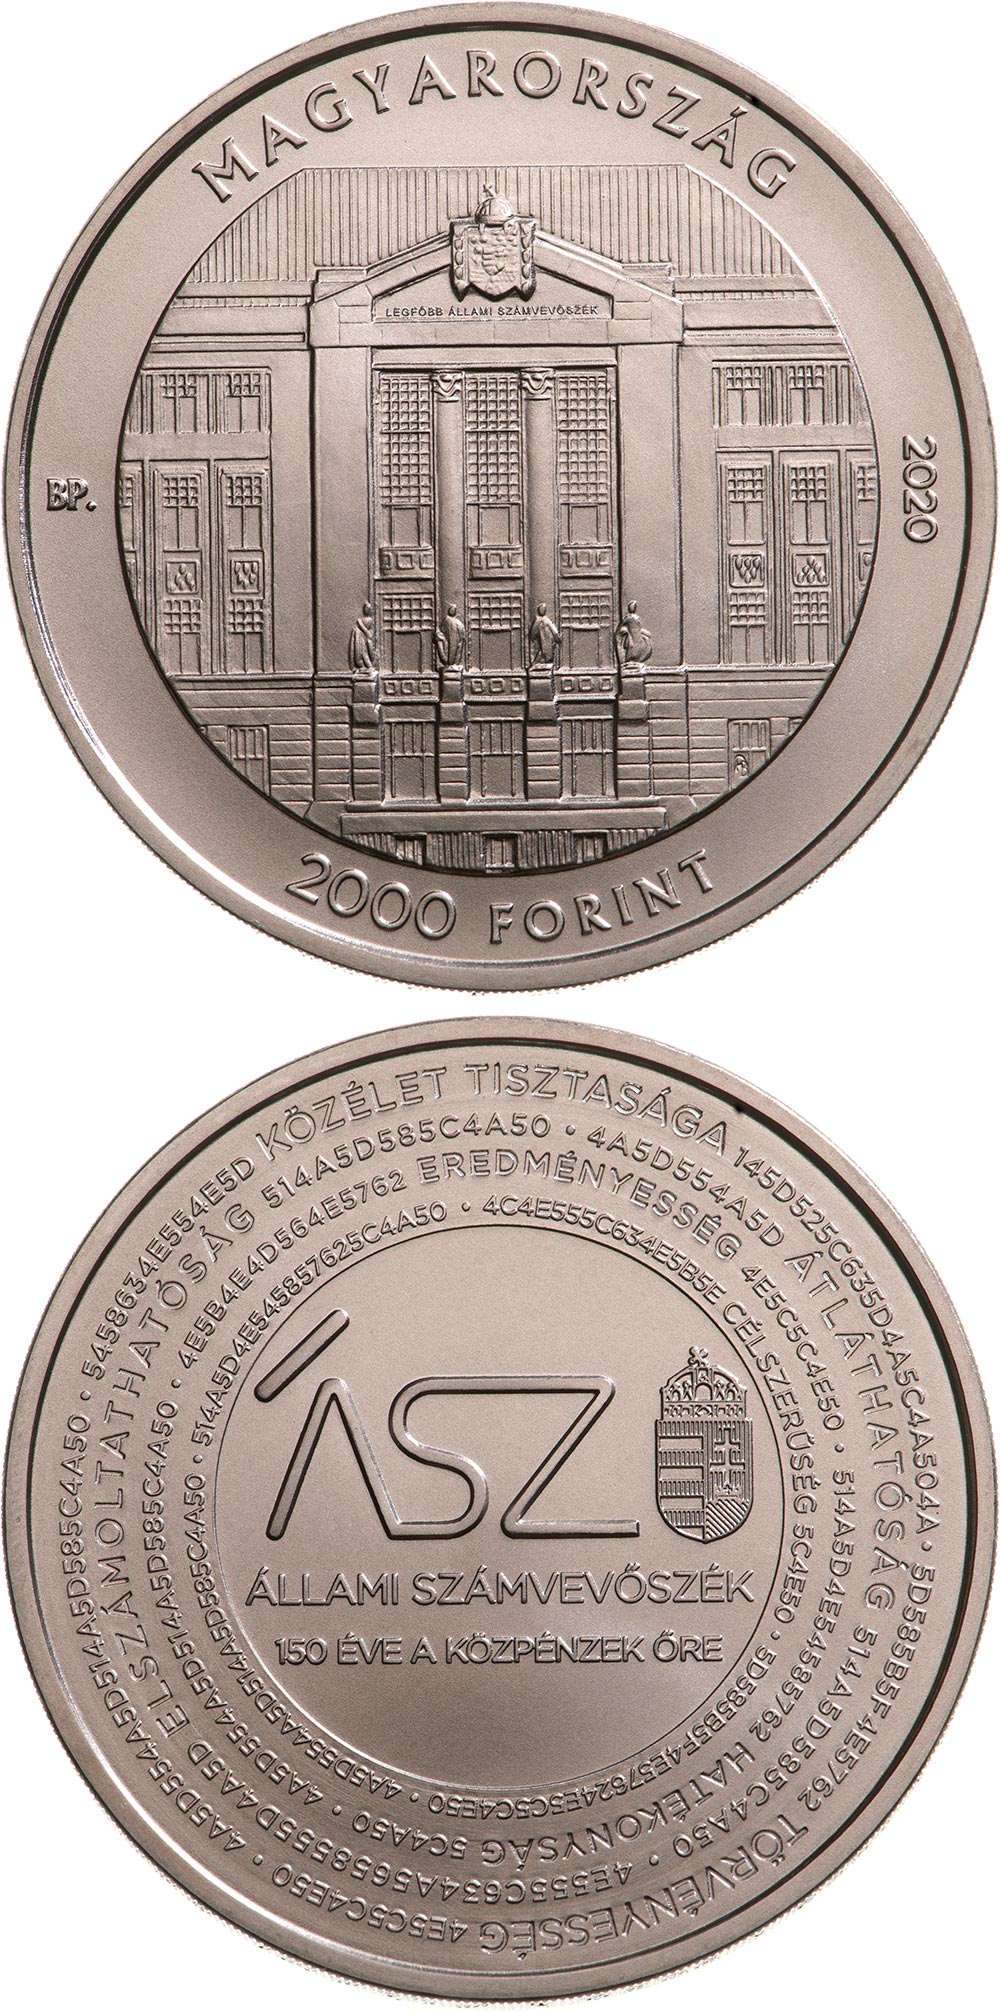 Image of 2000 forint coin - State Audit Office of Hungary | Hungary 2020.  The Copper–Nickel (CuNi) coin is of BU quality.